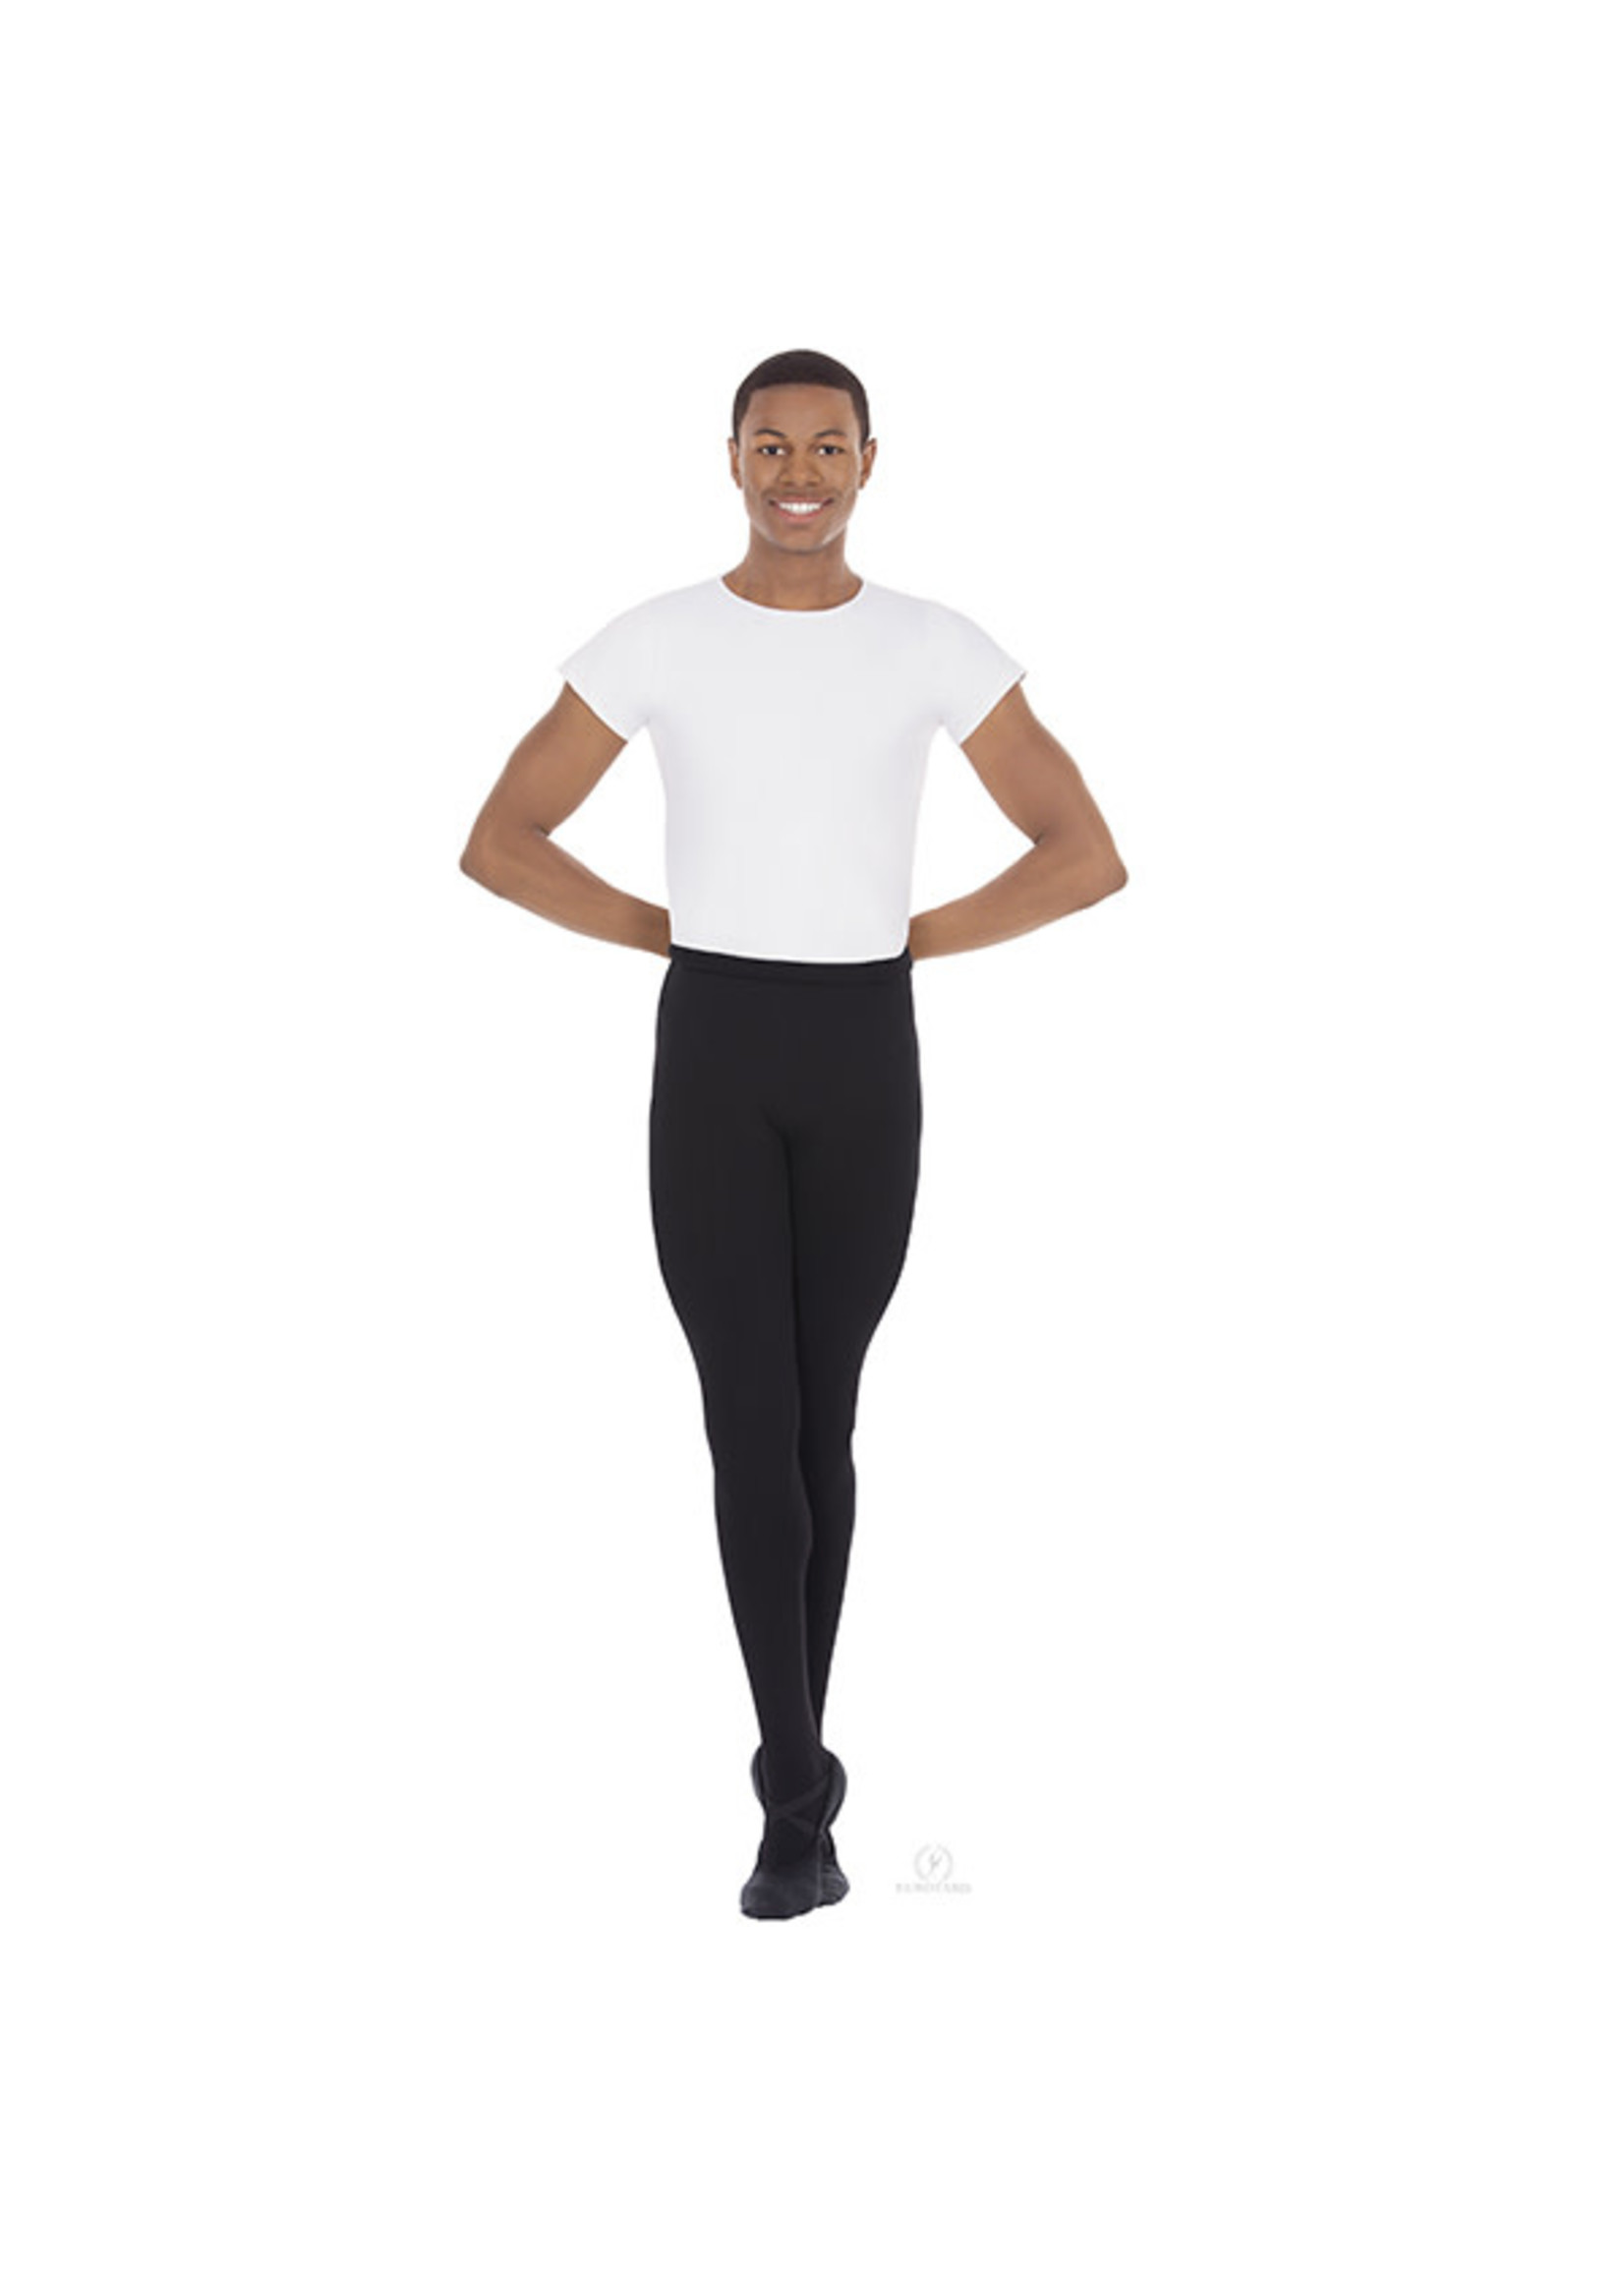 ET Men's Footed Tights with Woven Waistband